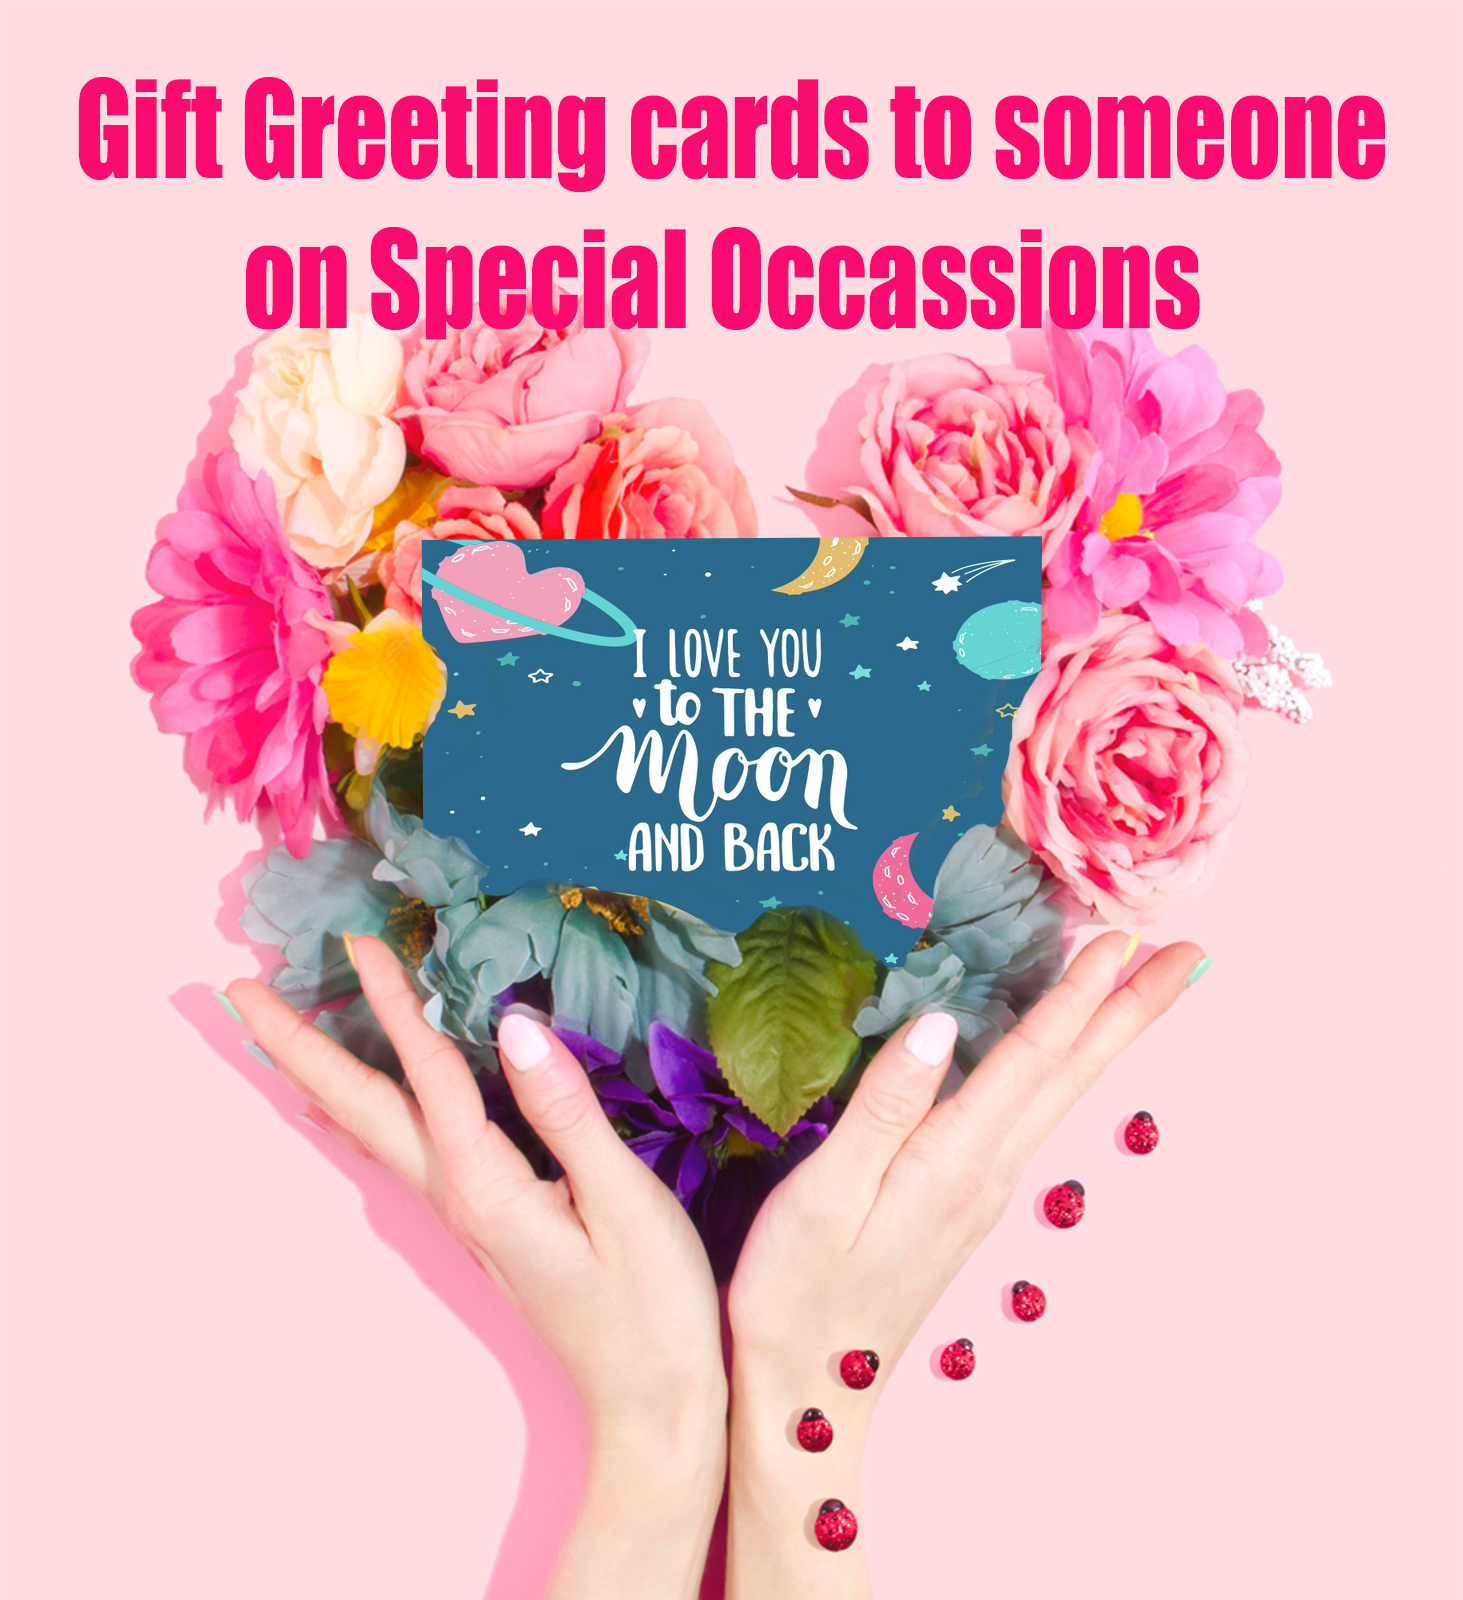 Buy Greeting Cards Online to Send Someone on Special Events